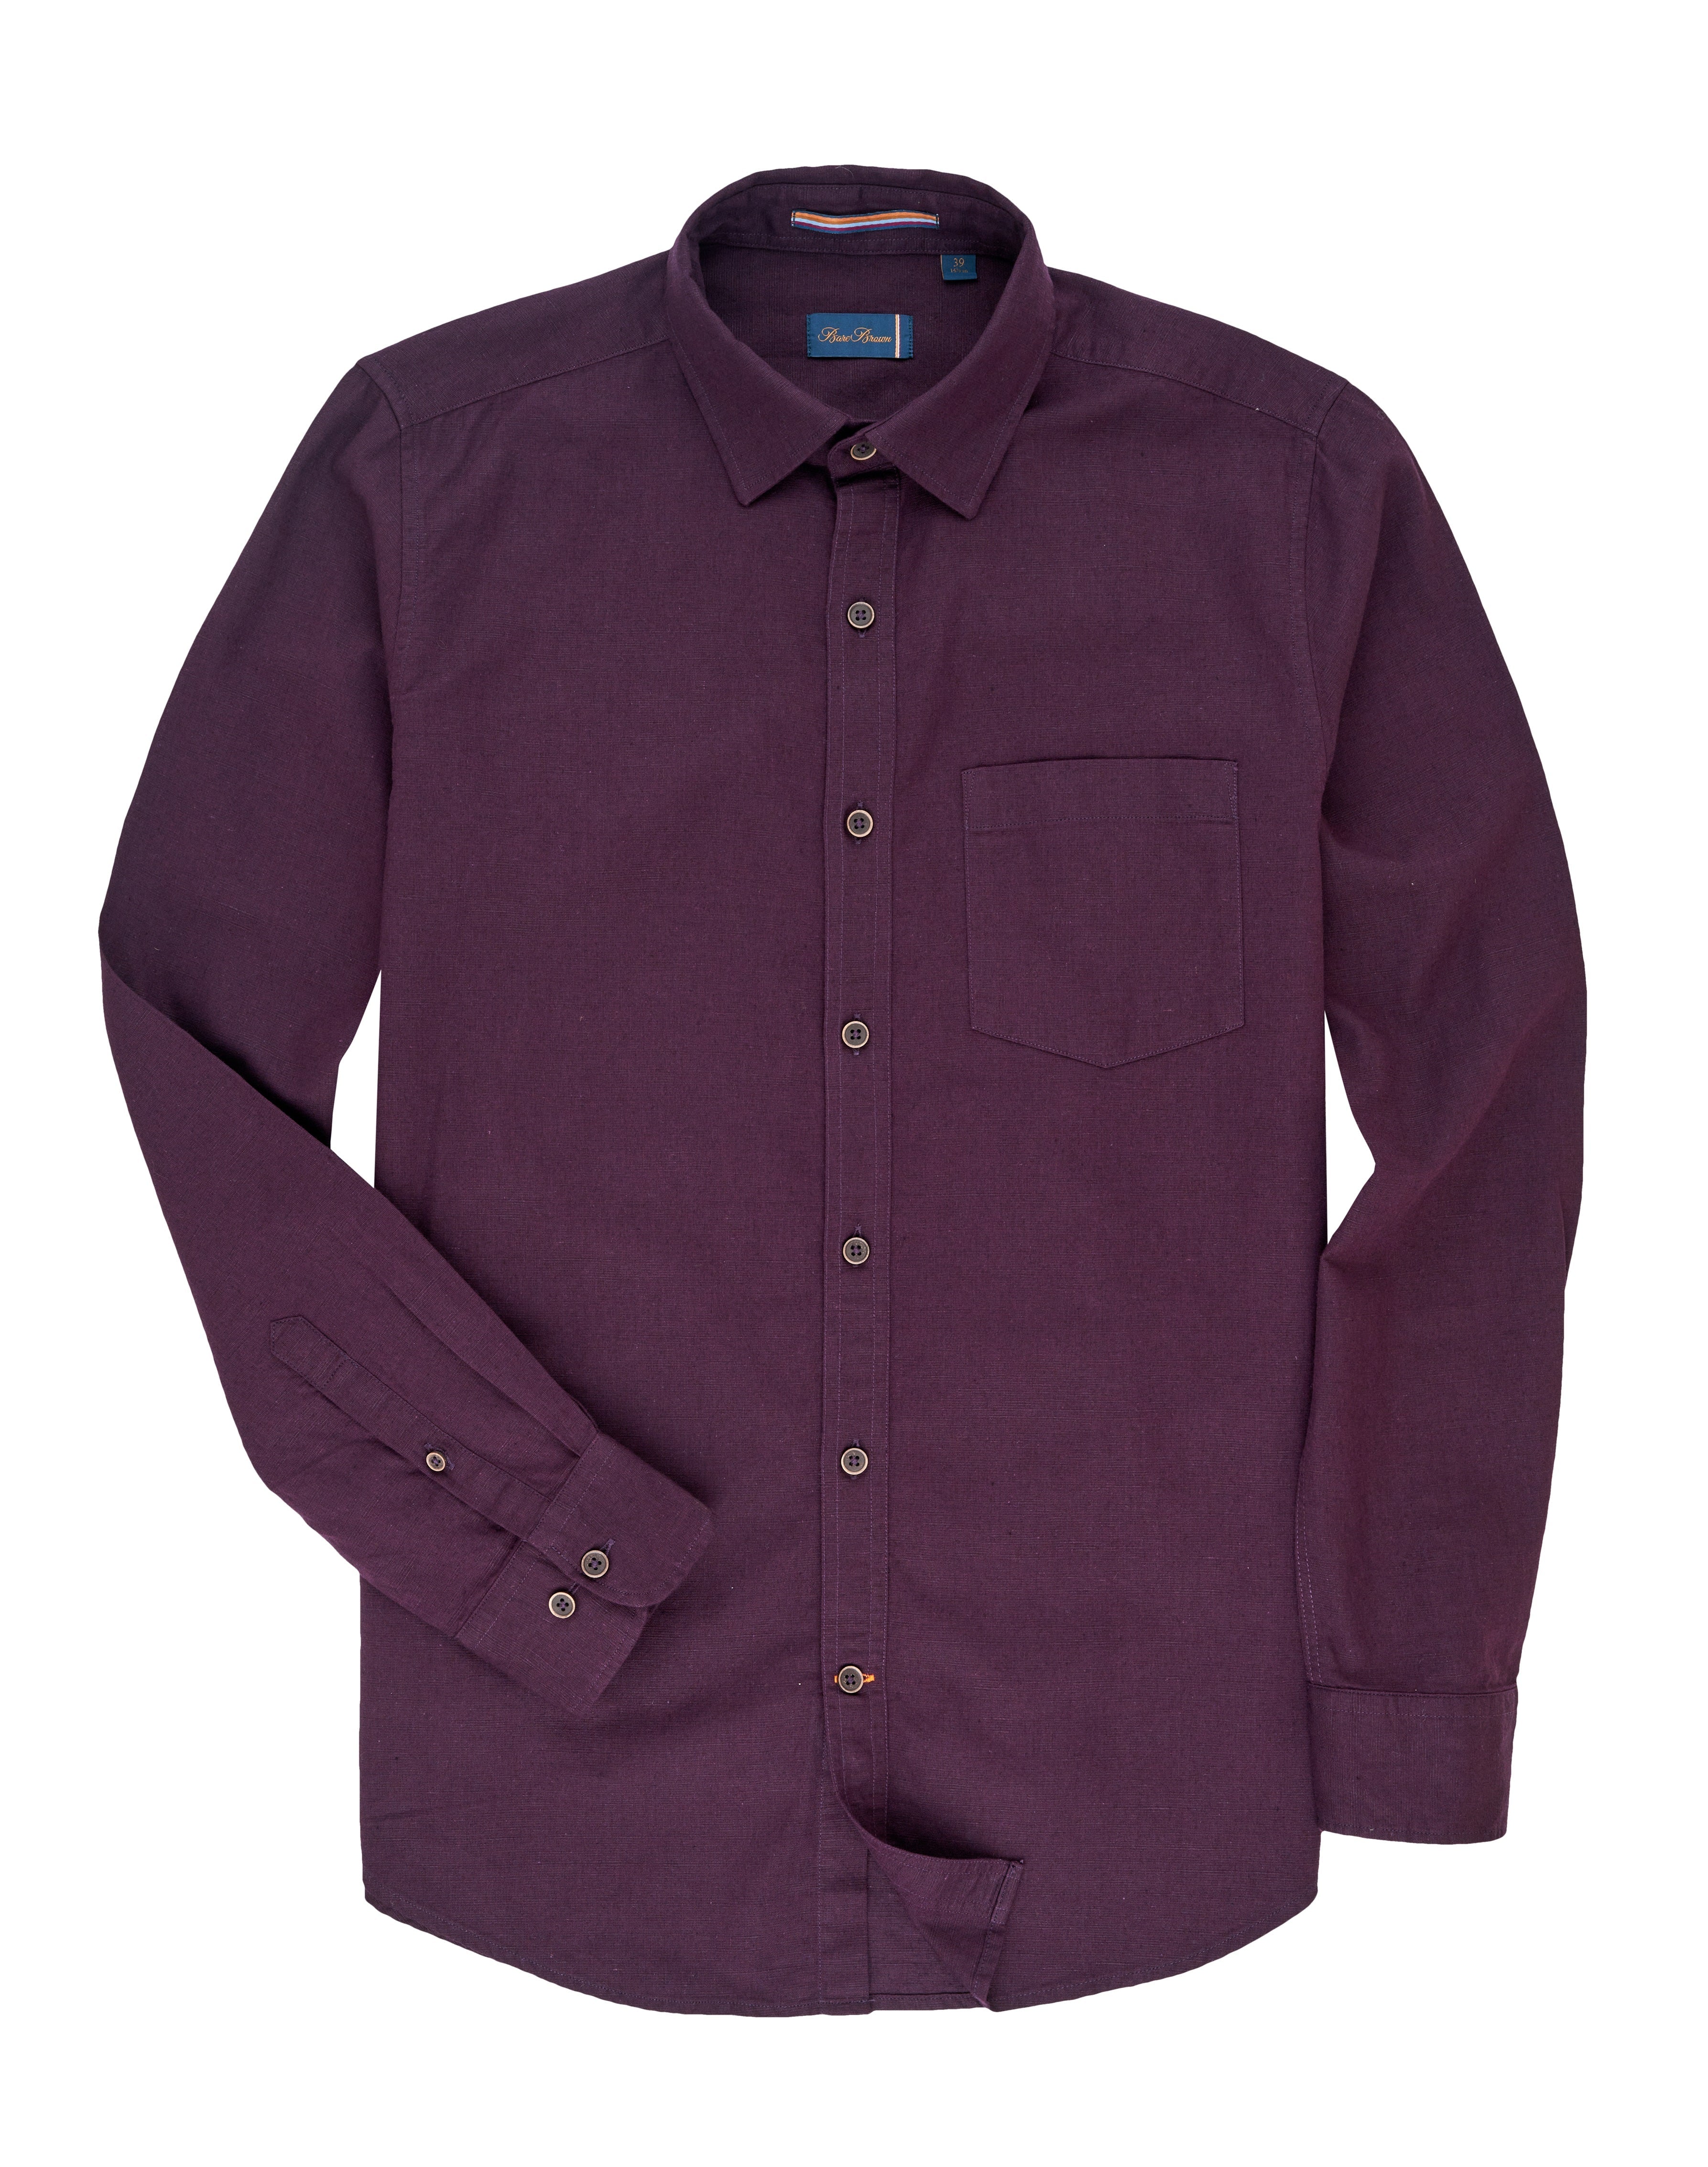 Bare Brown Regular Collar Cotton Linen Shirt, Slim Fit with Full Sleeves - Wine